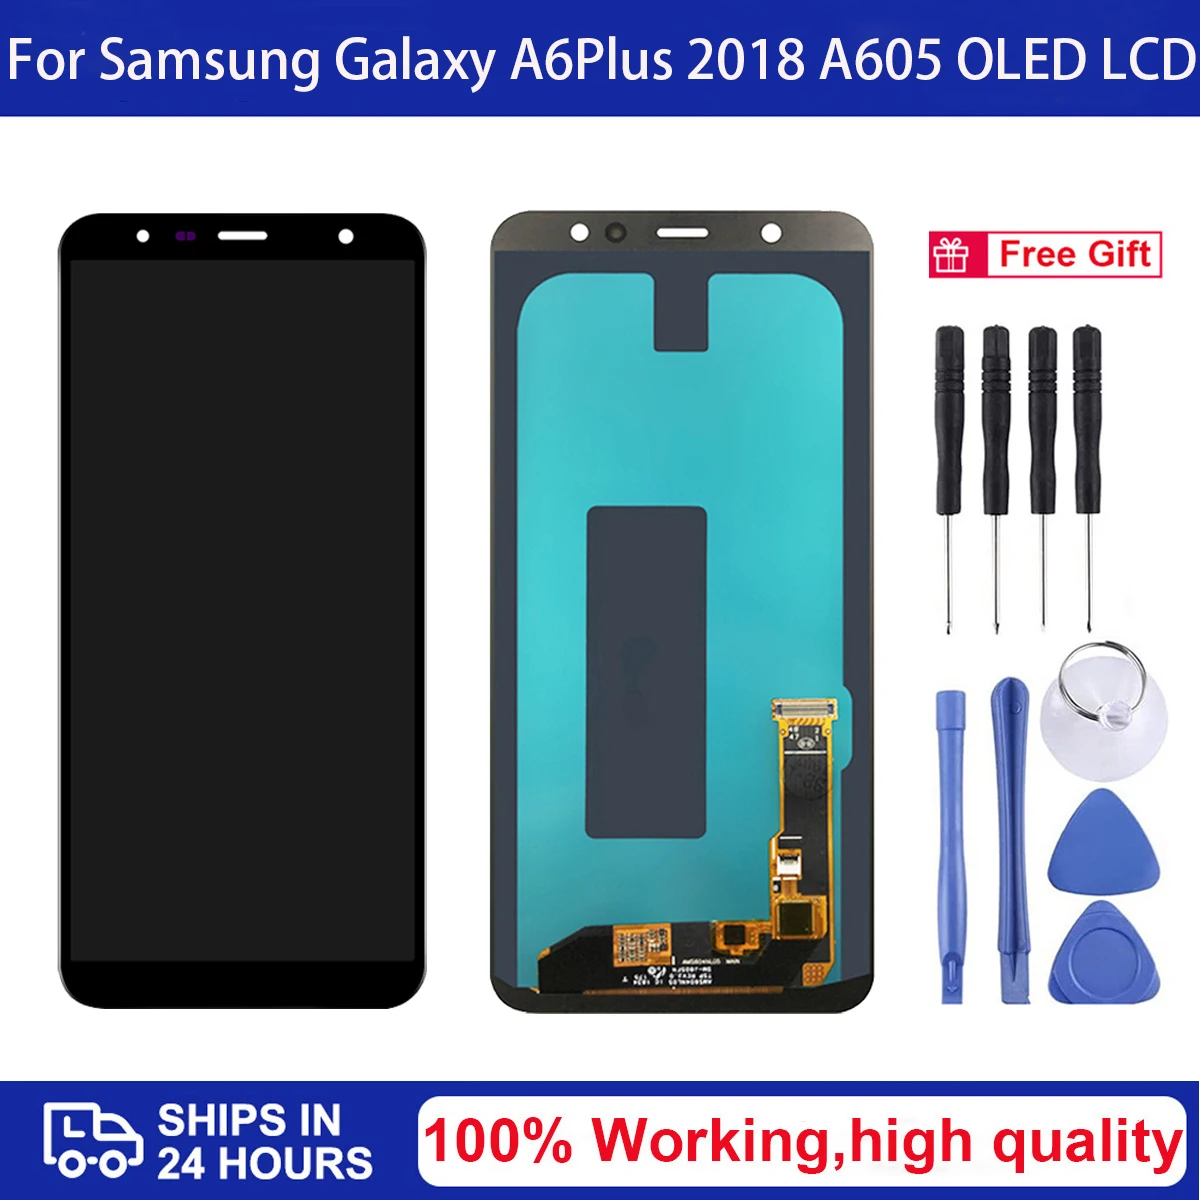 

6.0" OLED A6+ Display For Samsung Galaxy A6 Plus 2018 A605 A605F A605FN A605FD LCD Display with Touch Screen Digitizer Assembly